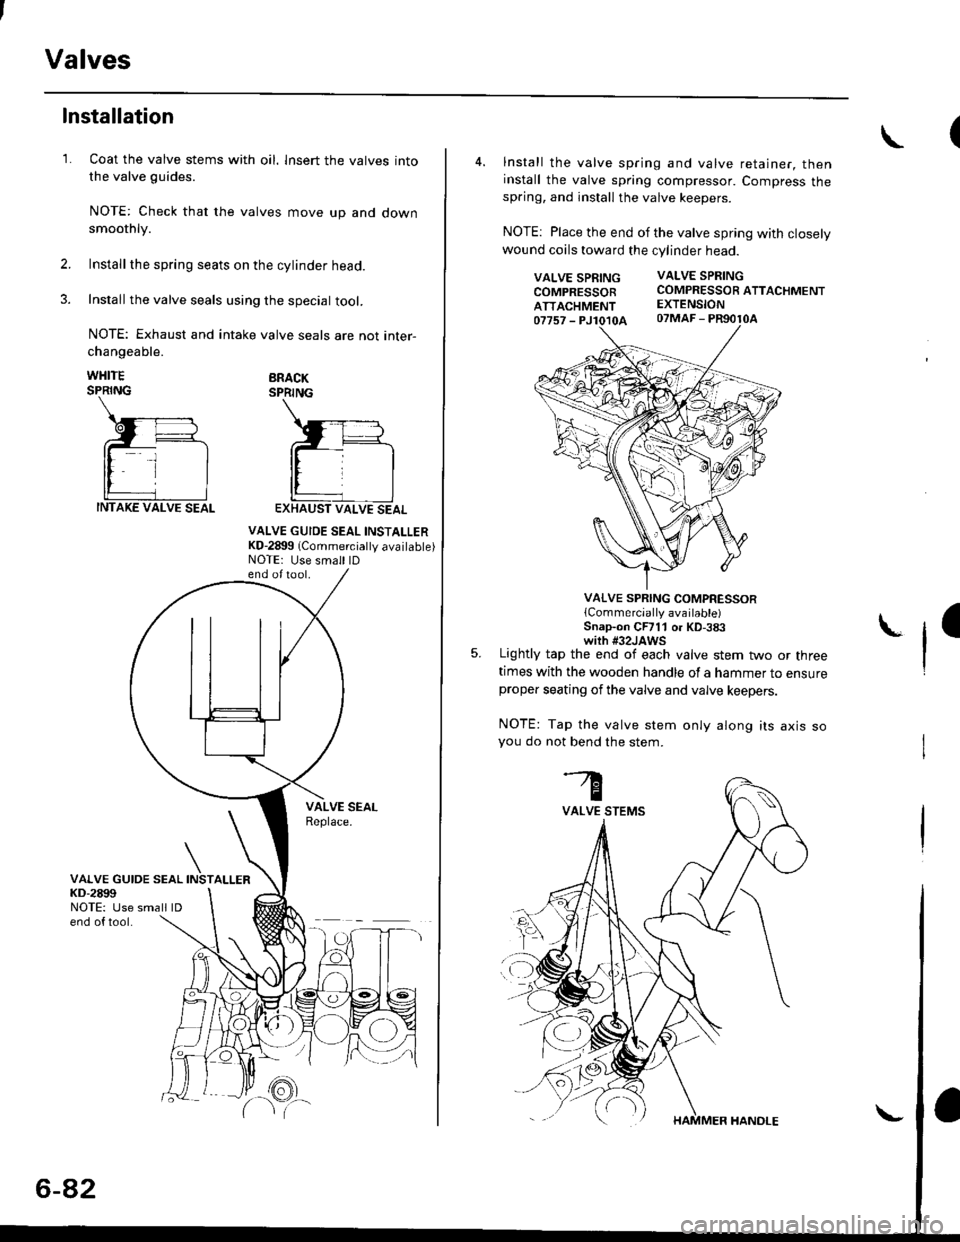 HONDA CIVIC 1999 6.G Workshop Manual Valves
1.
Installation
Coat the valve stems with oil. lnsert the valves into
the valve guides.
NOTE: Check that the valves move up and downsmoothly.
Installthe spring seats on the cylinder head.
Insta